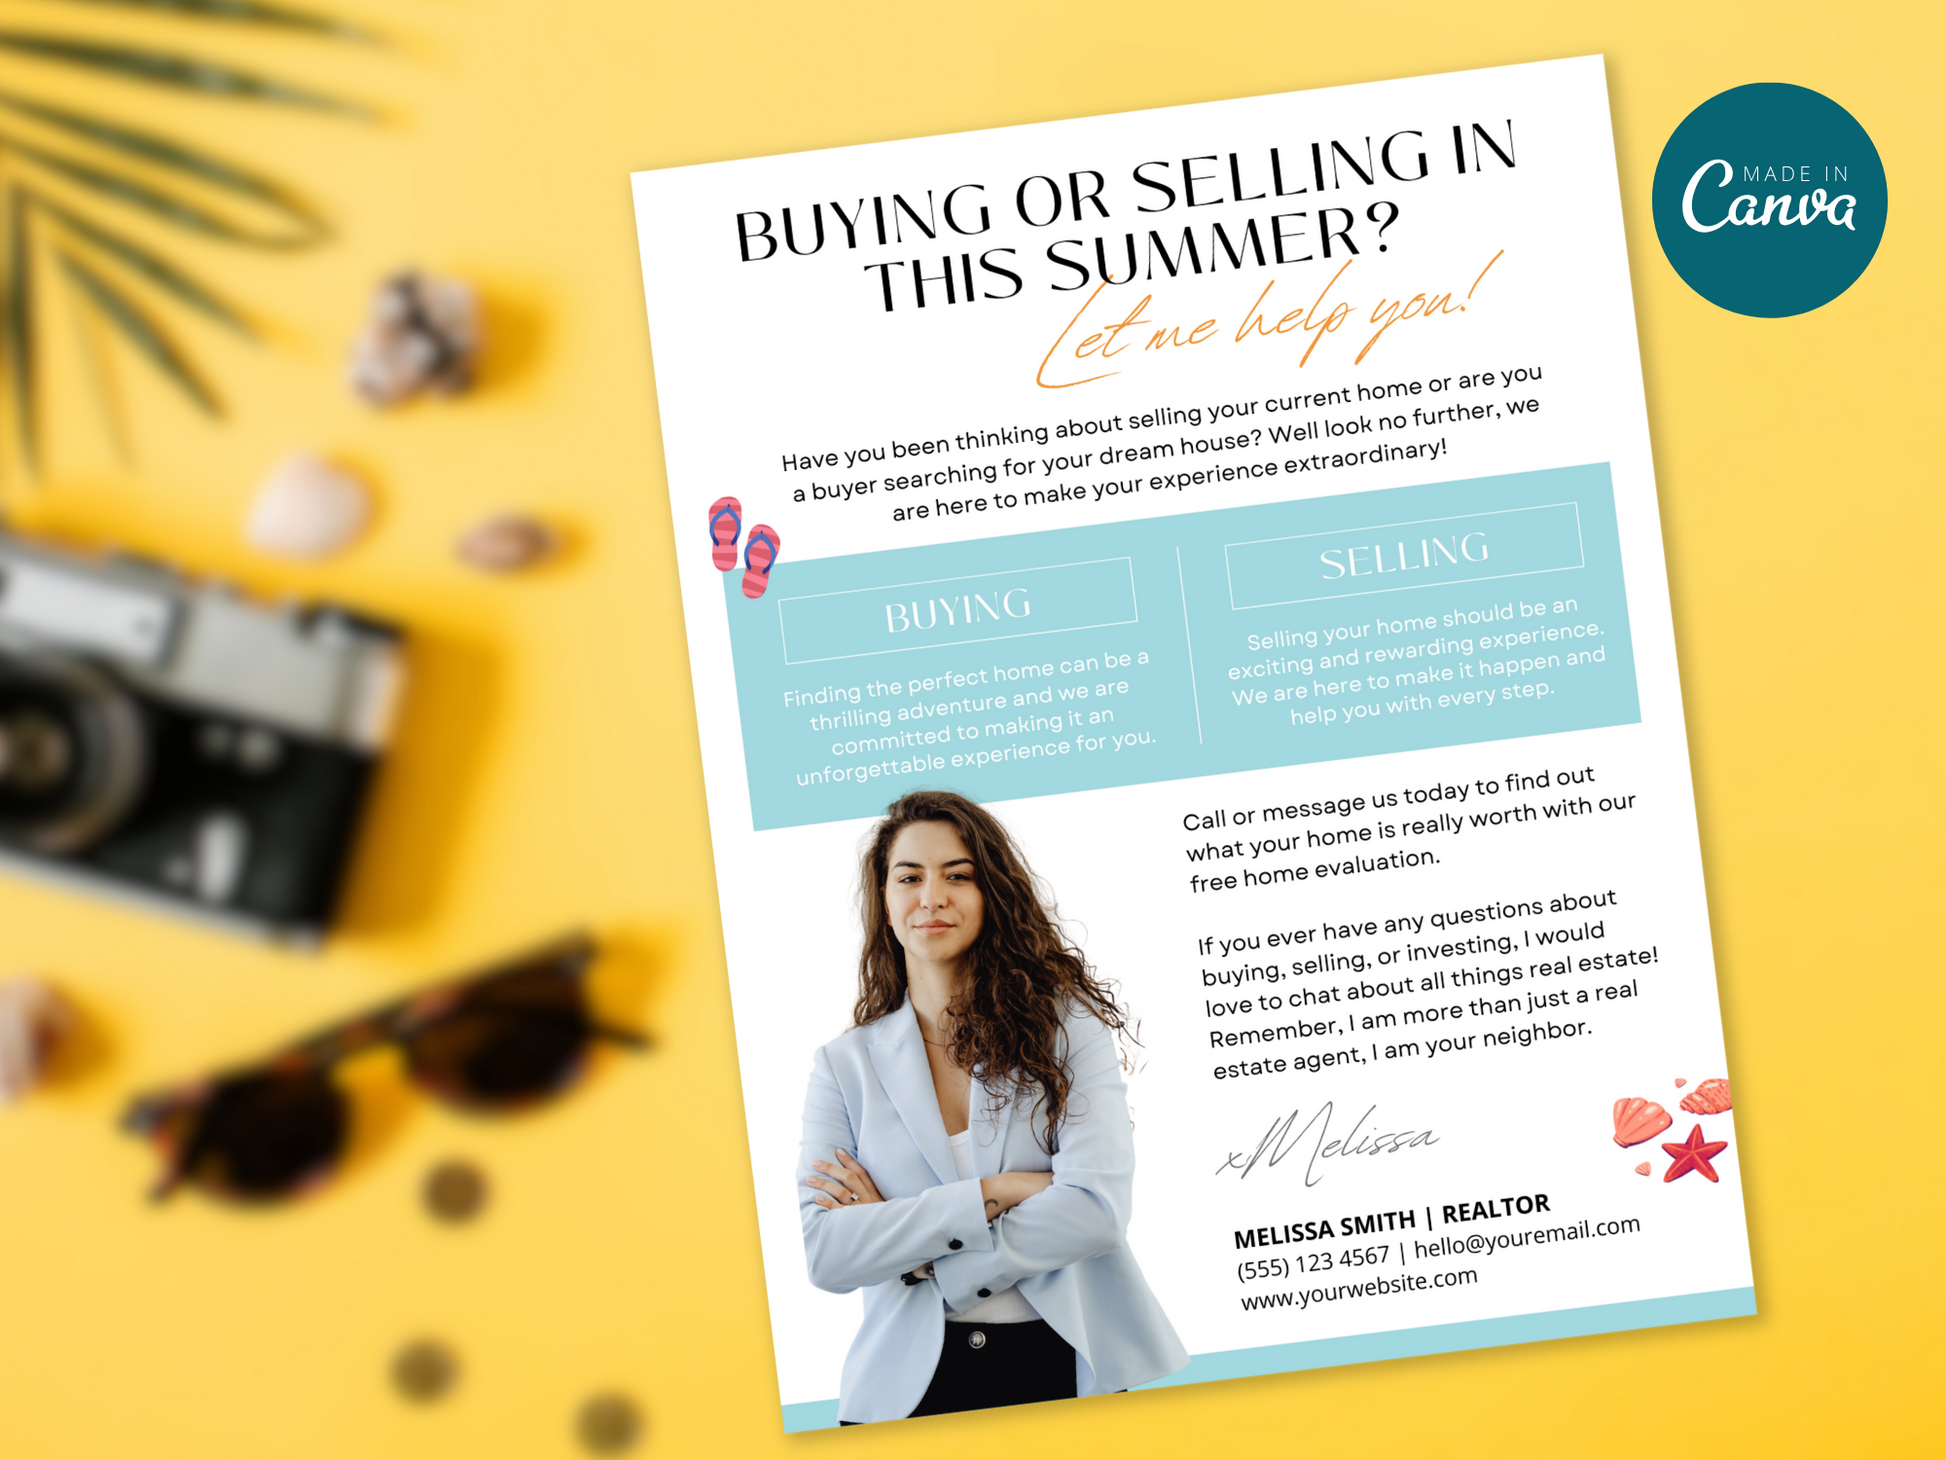 Summer Buying or Selling Letter Vol 01 - Dive into the summer real estate market with valuable insights and tips.